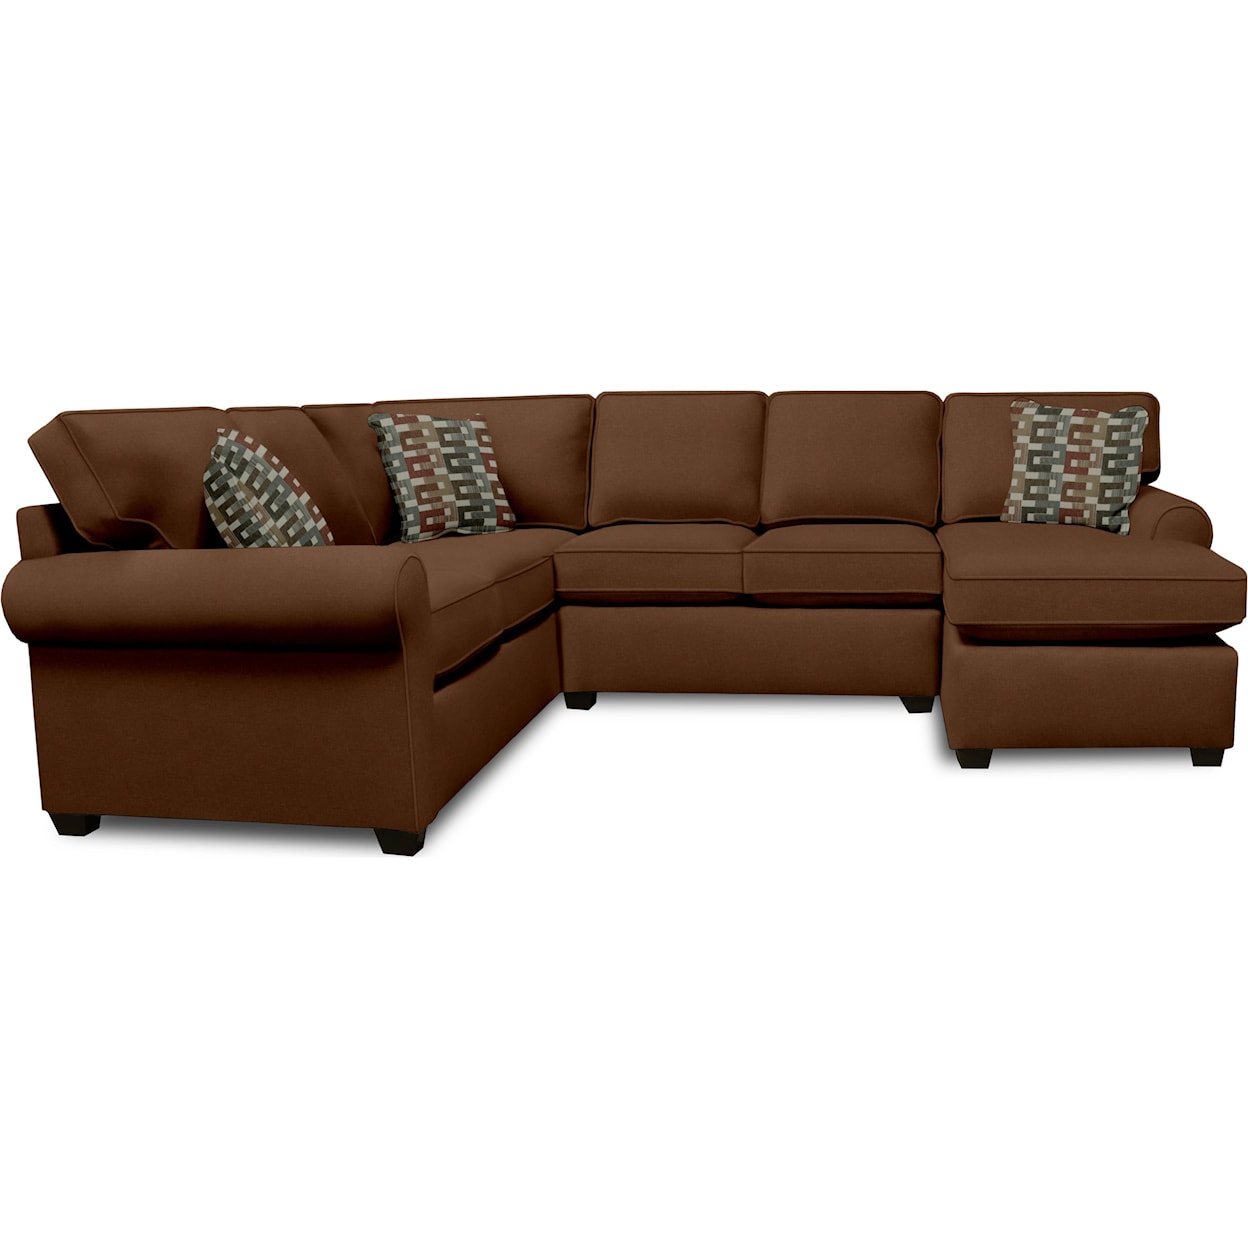 England 2630 Series 3-Piece Chaise Sectional Sofa